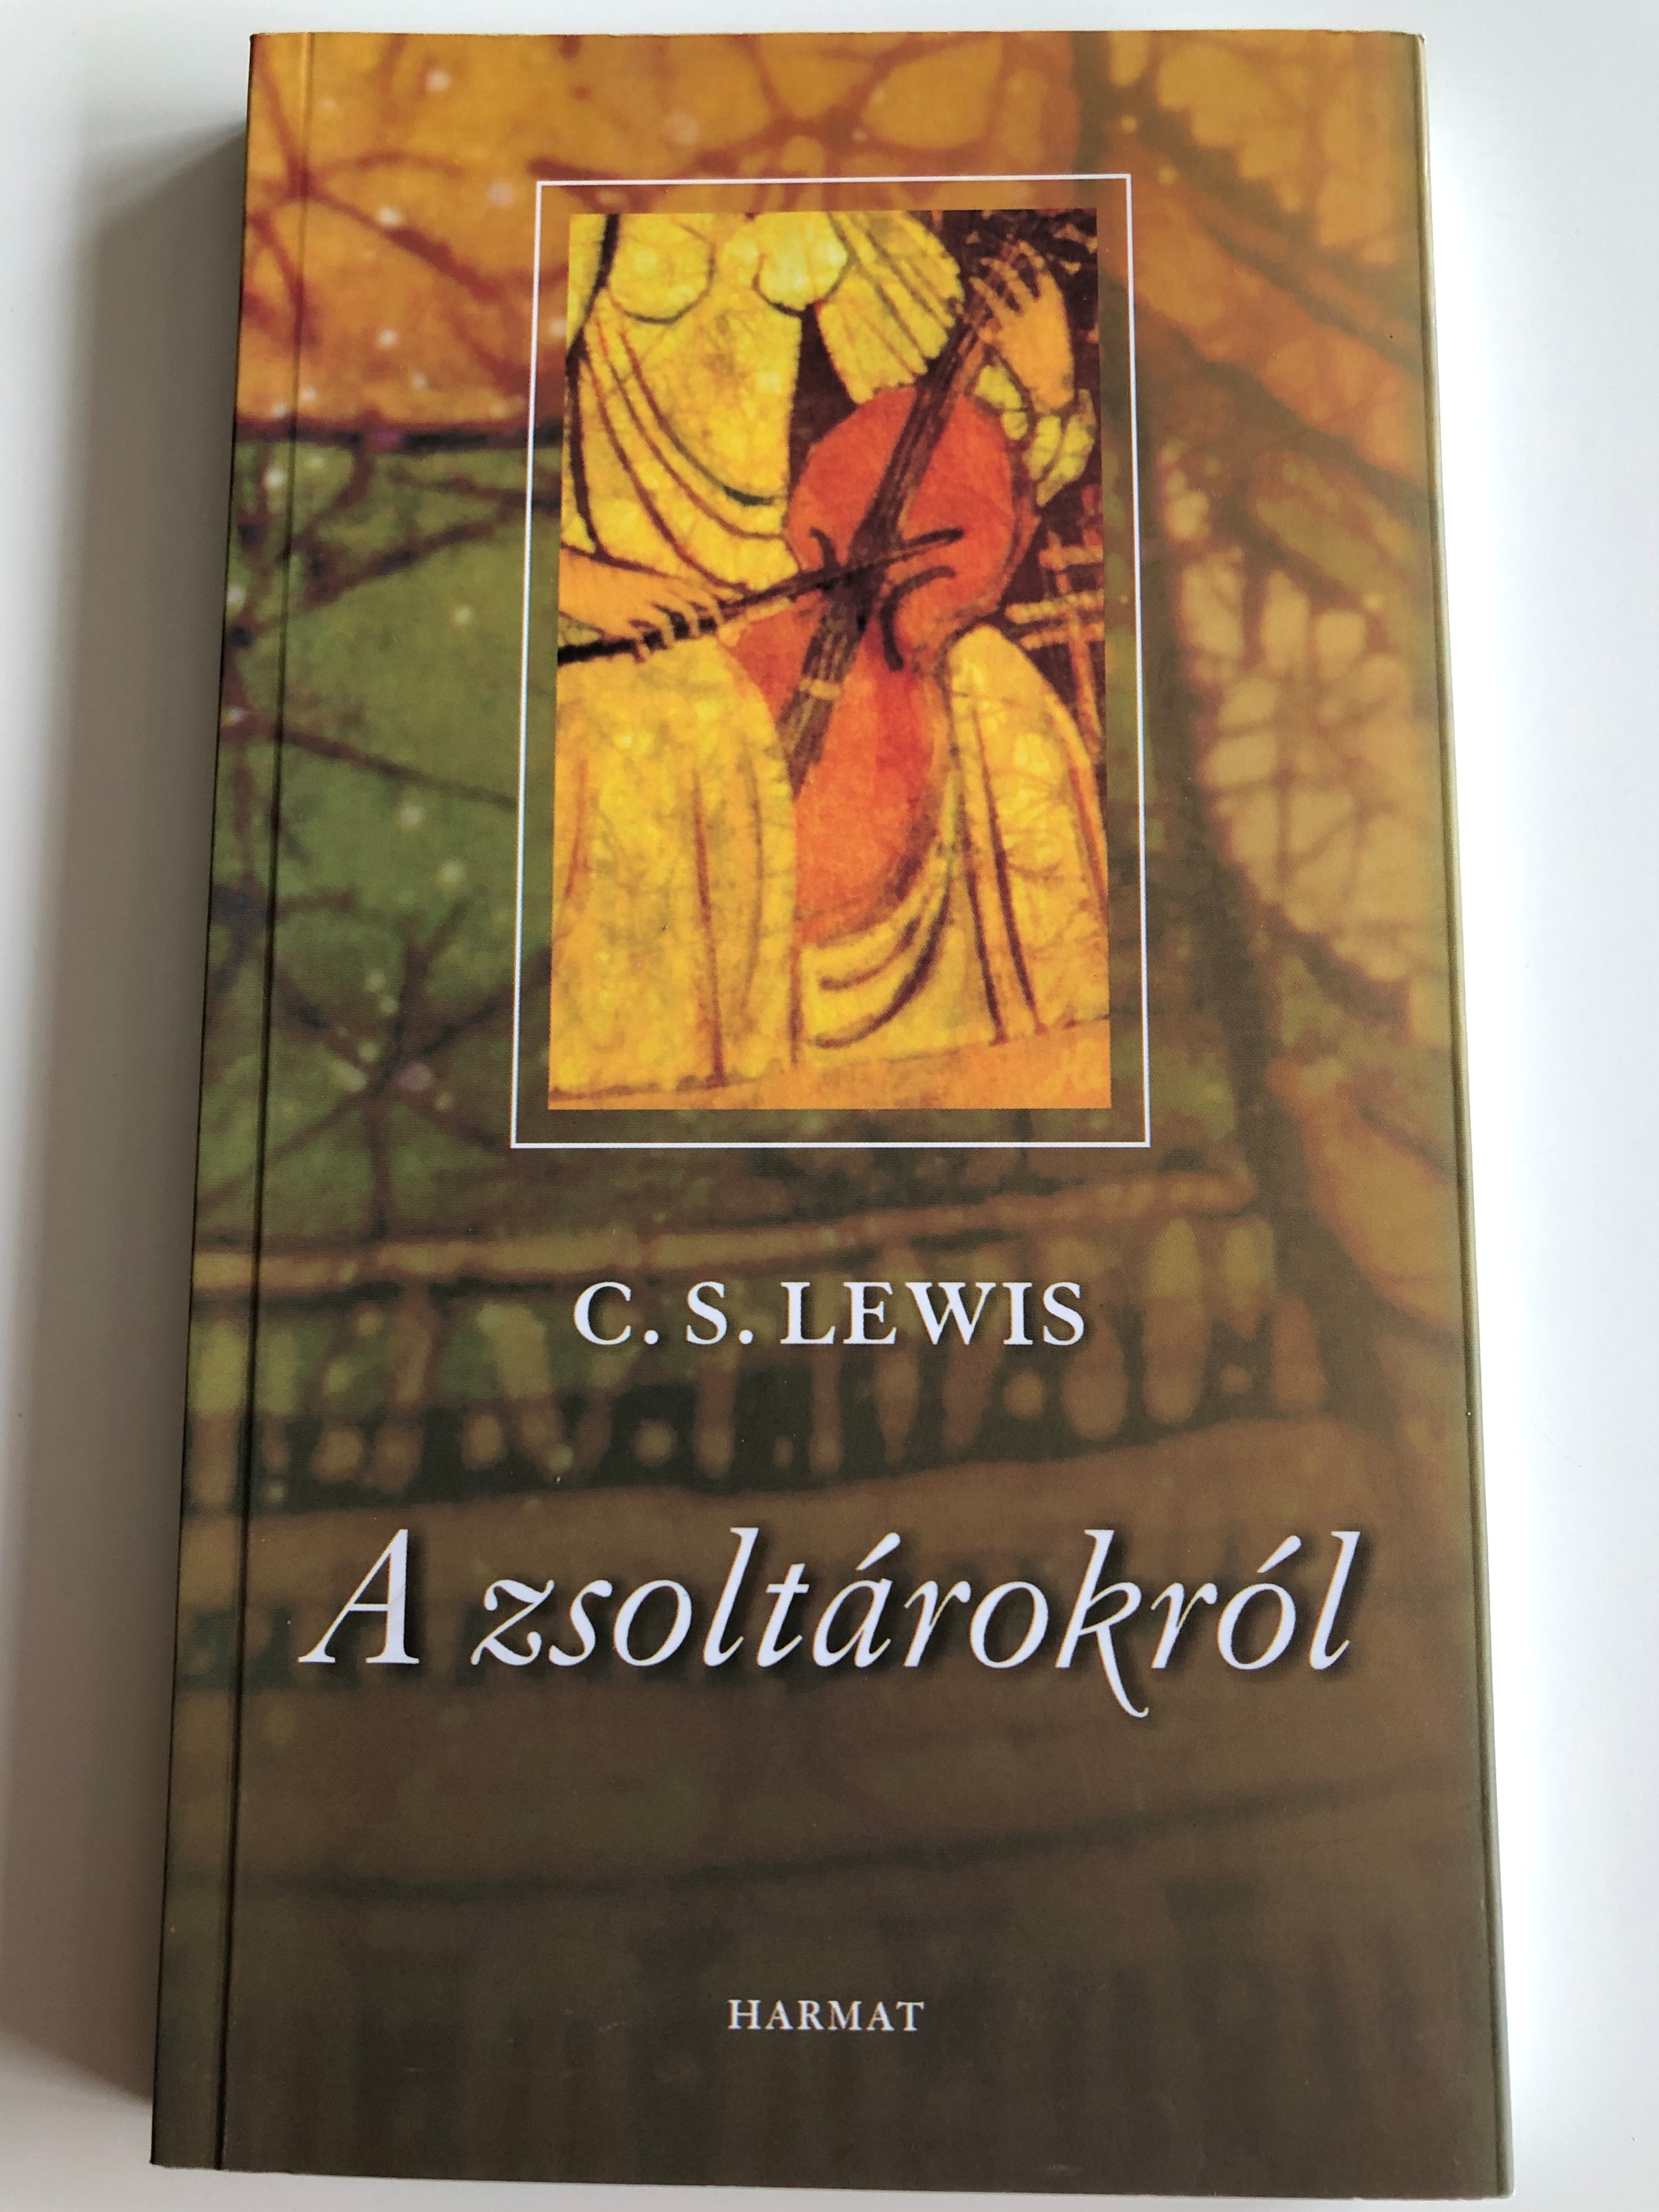 a-zsolt-rokr-l-by-c.-s.-lewis-hungarian-edition-of-reflections-on-the-psalms-1.jpg